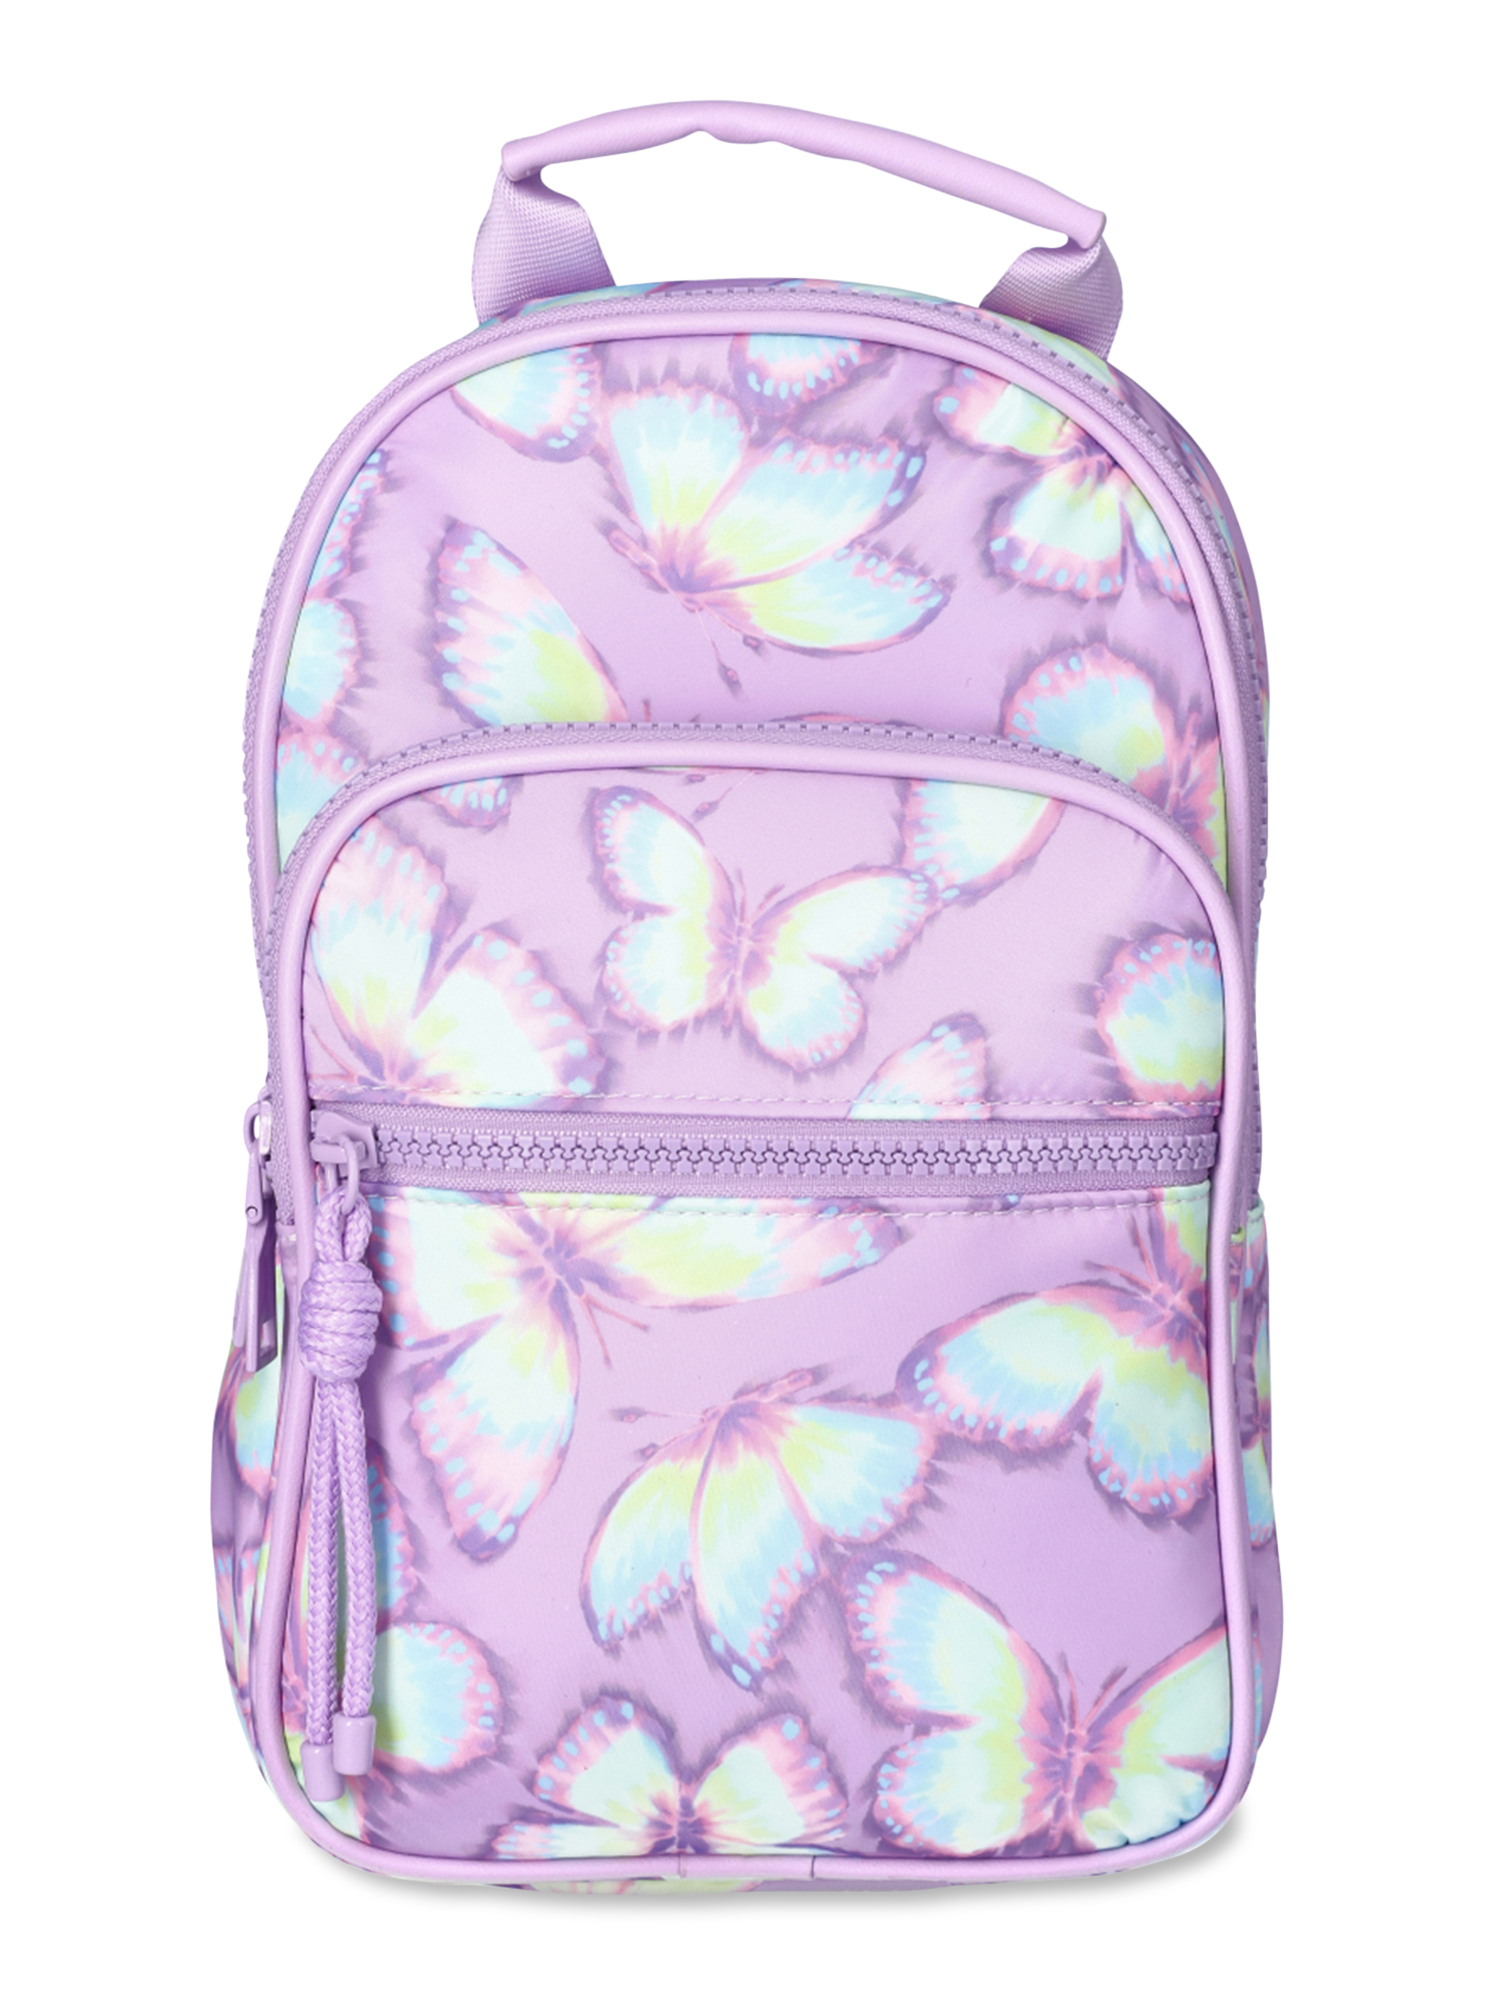 No Boundaries Women's Hands-Free Sling Bag, Lavender Butterfly - image 1 of 6